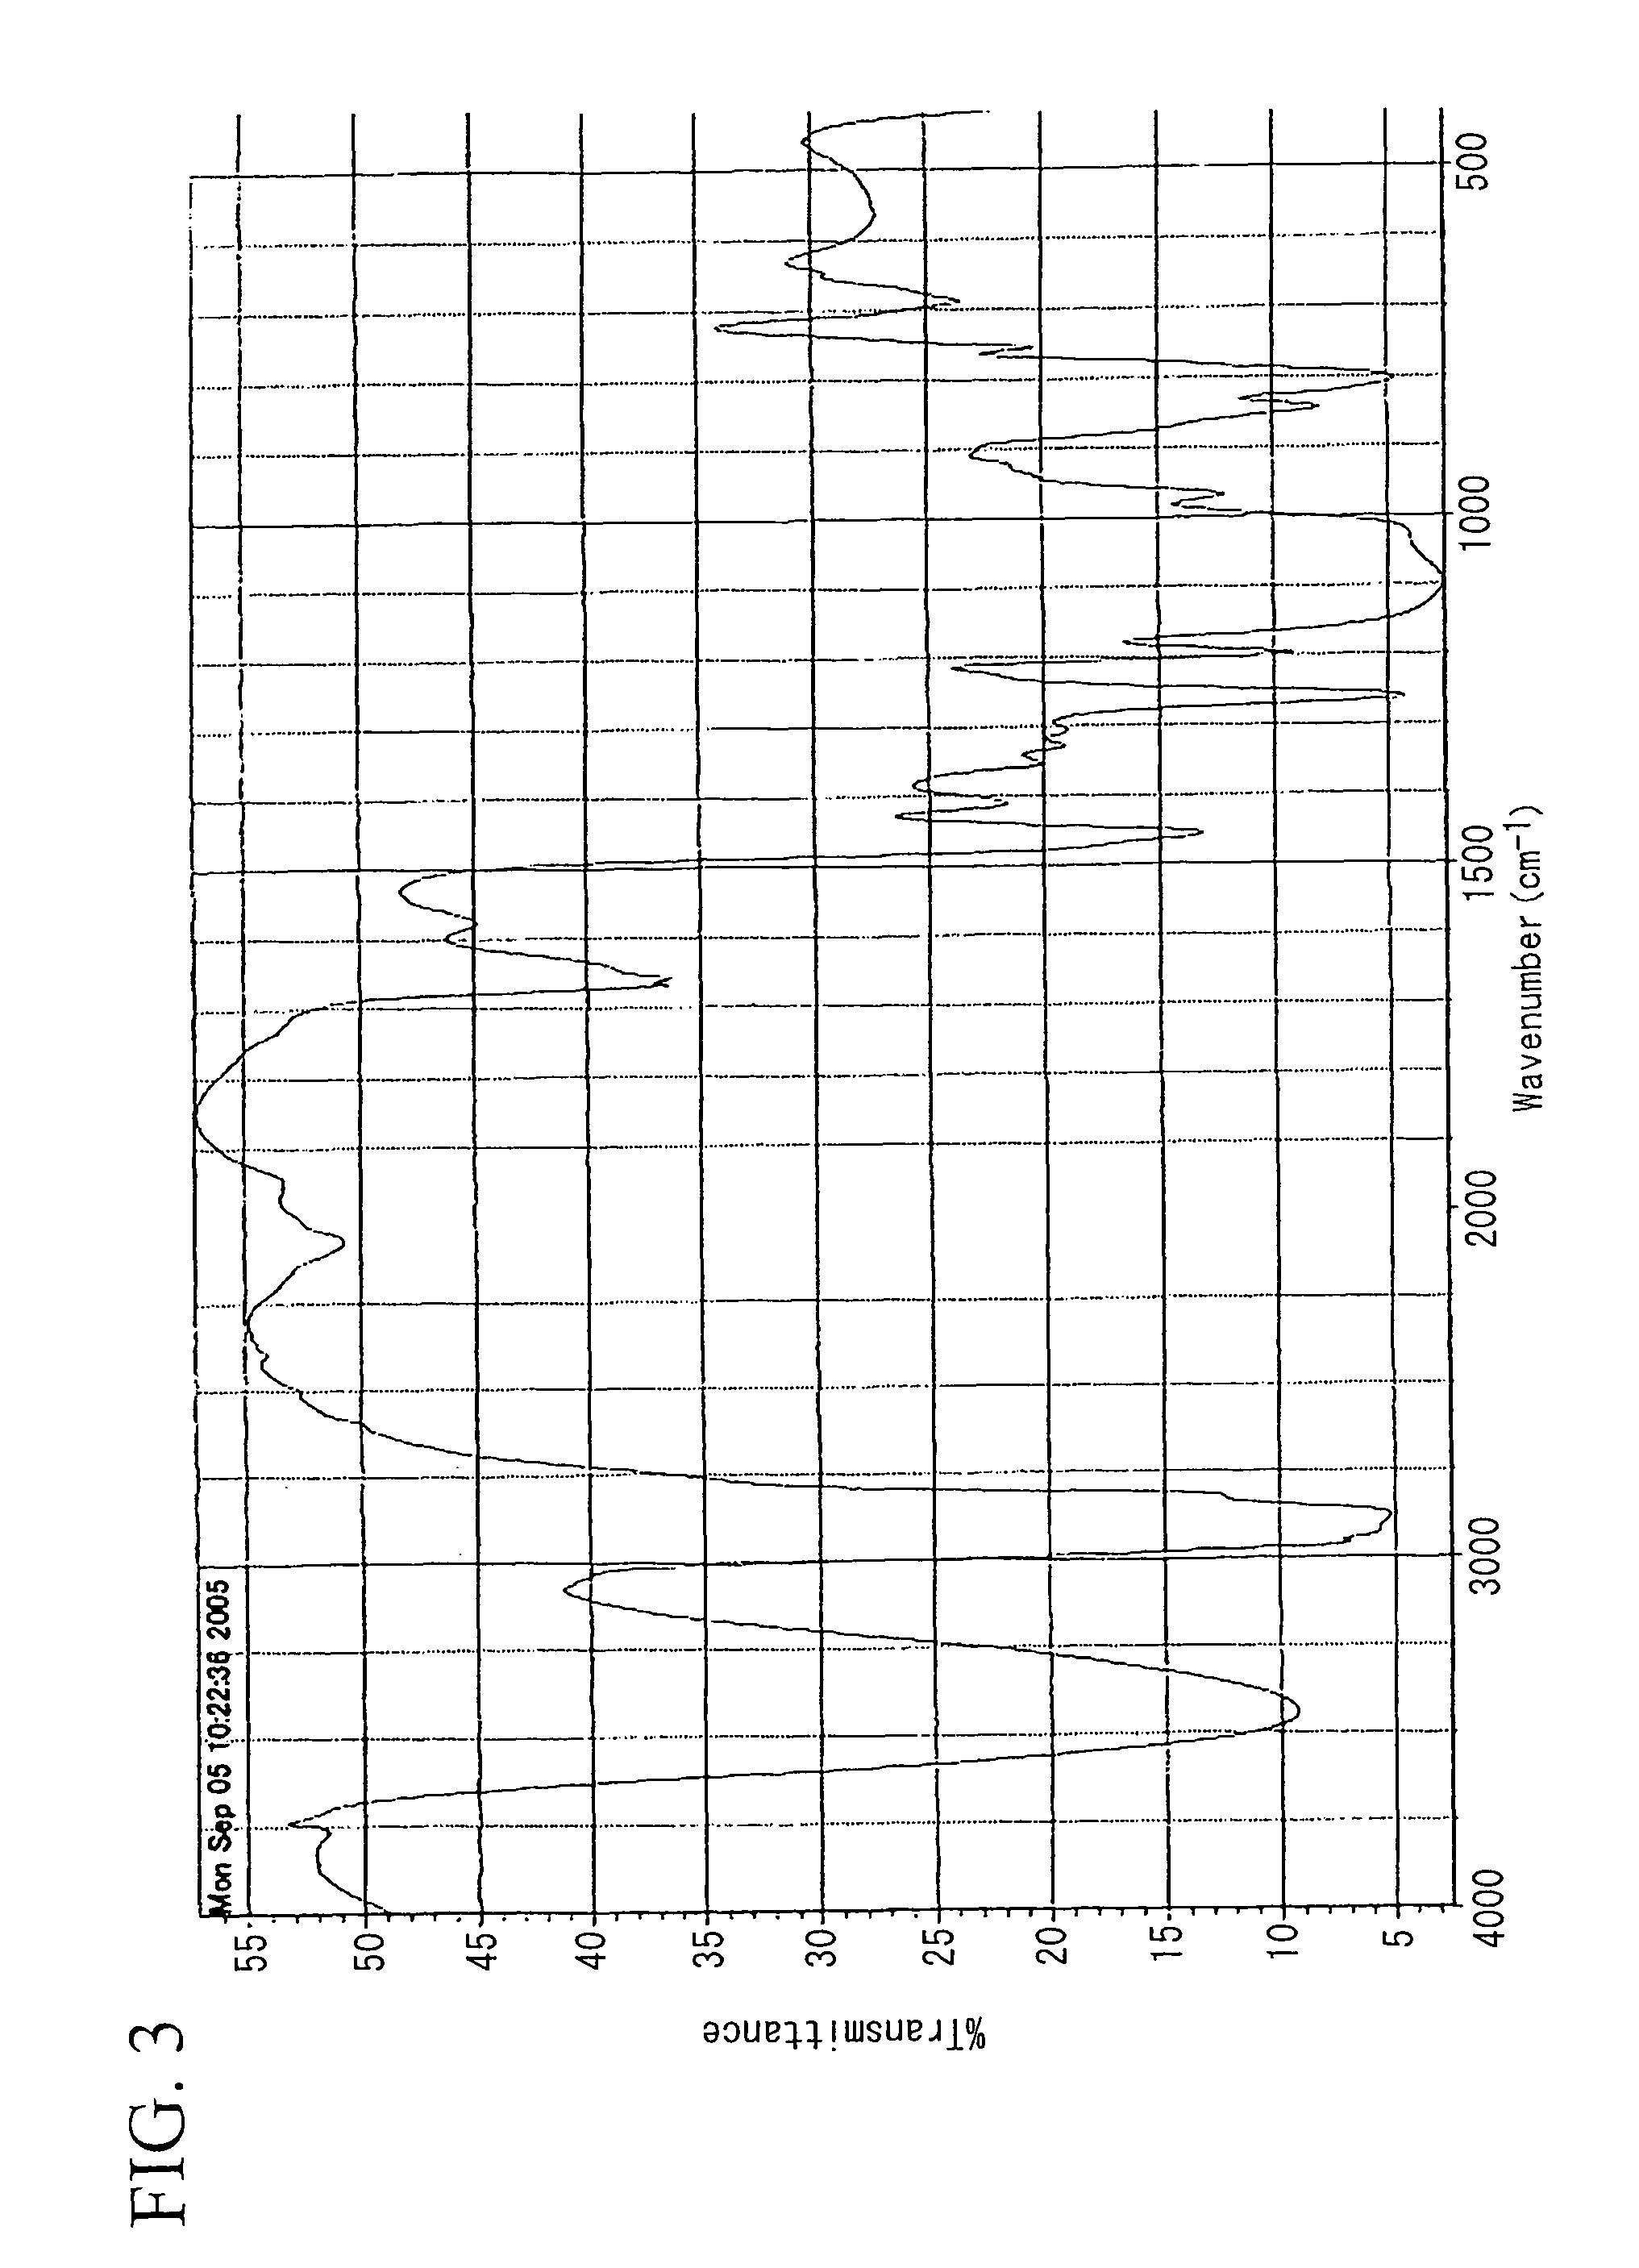 Partially hydrocarbon group-blocked (poly)glycerol-modified polysiloxane, method for producing the same, and cosmetic composition containing the same